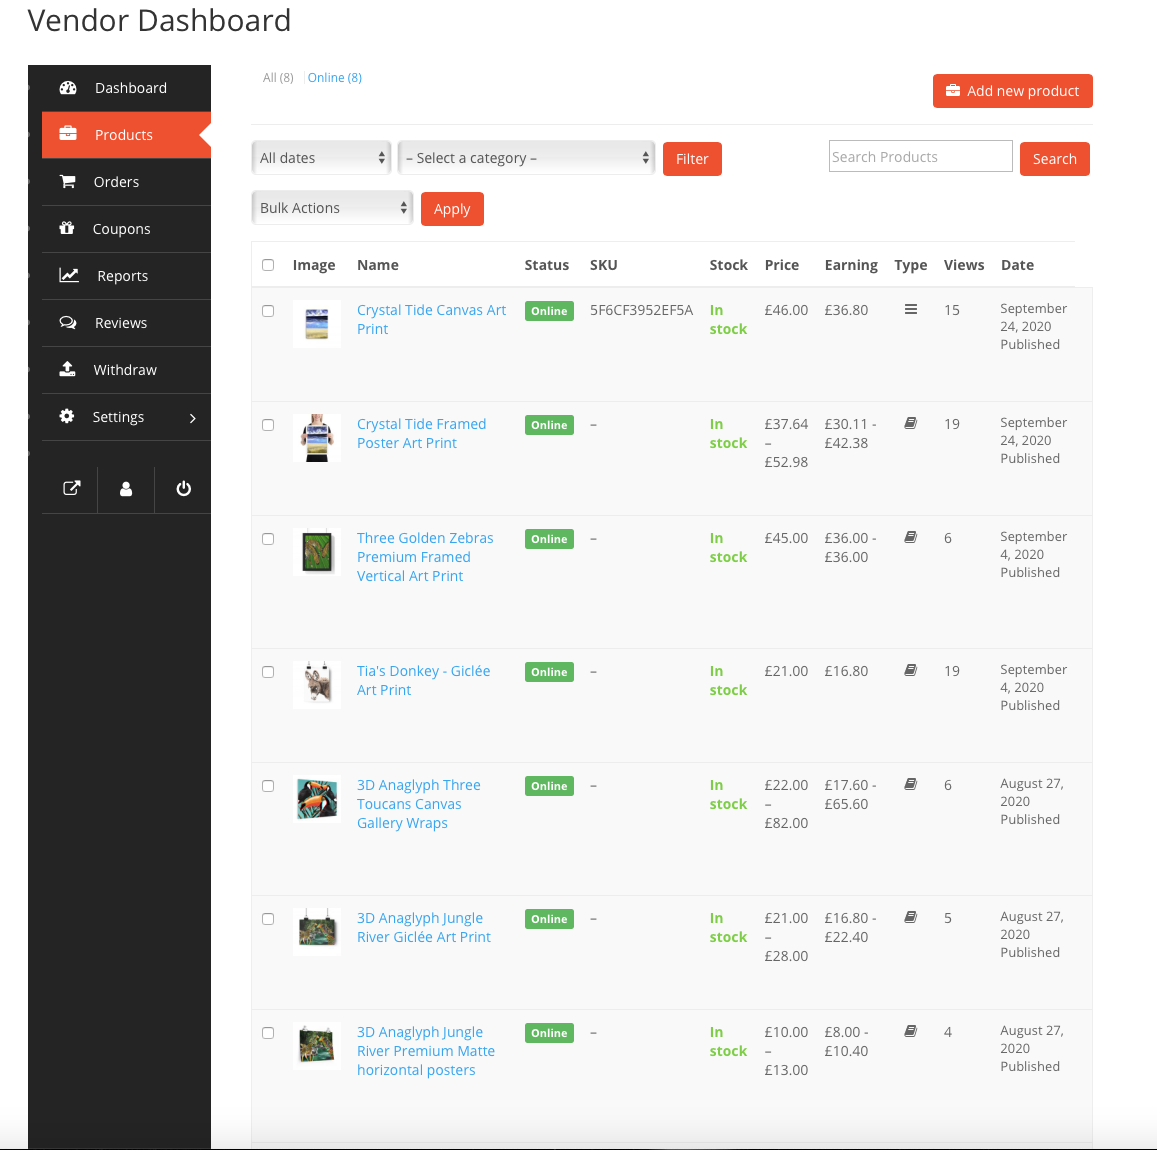 Vendor Dashboard Products